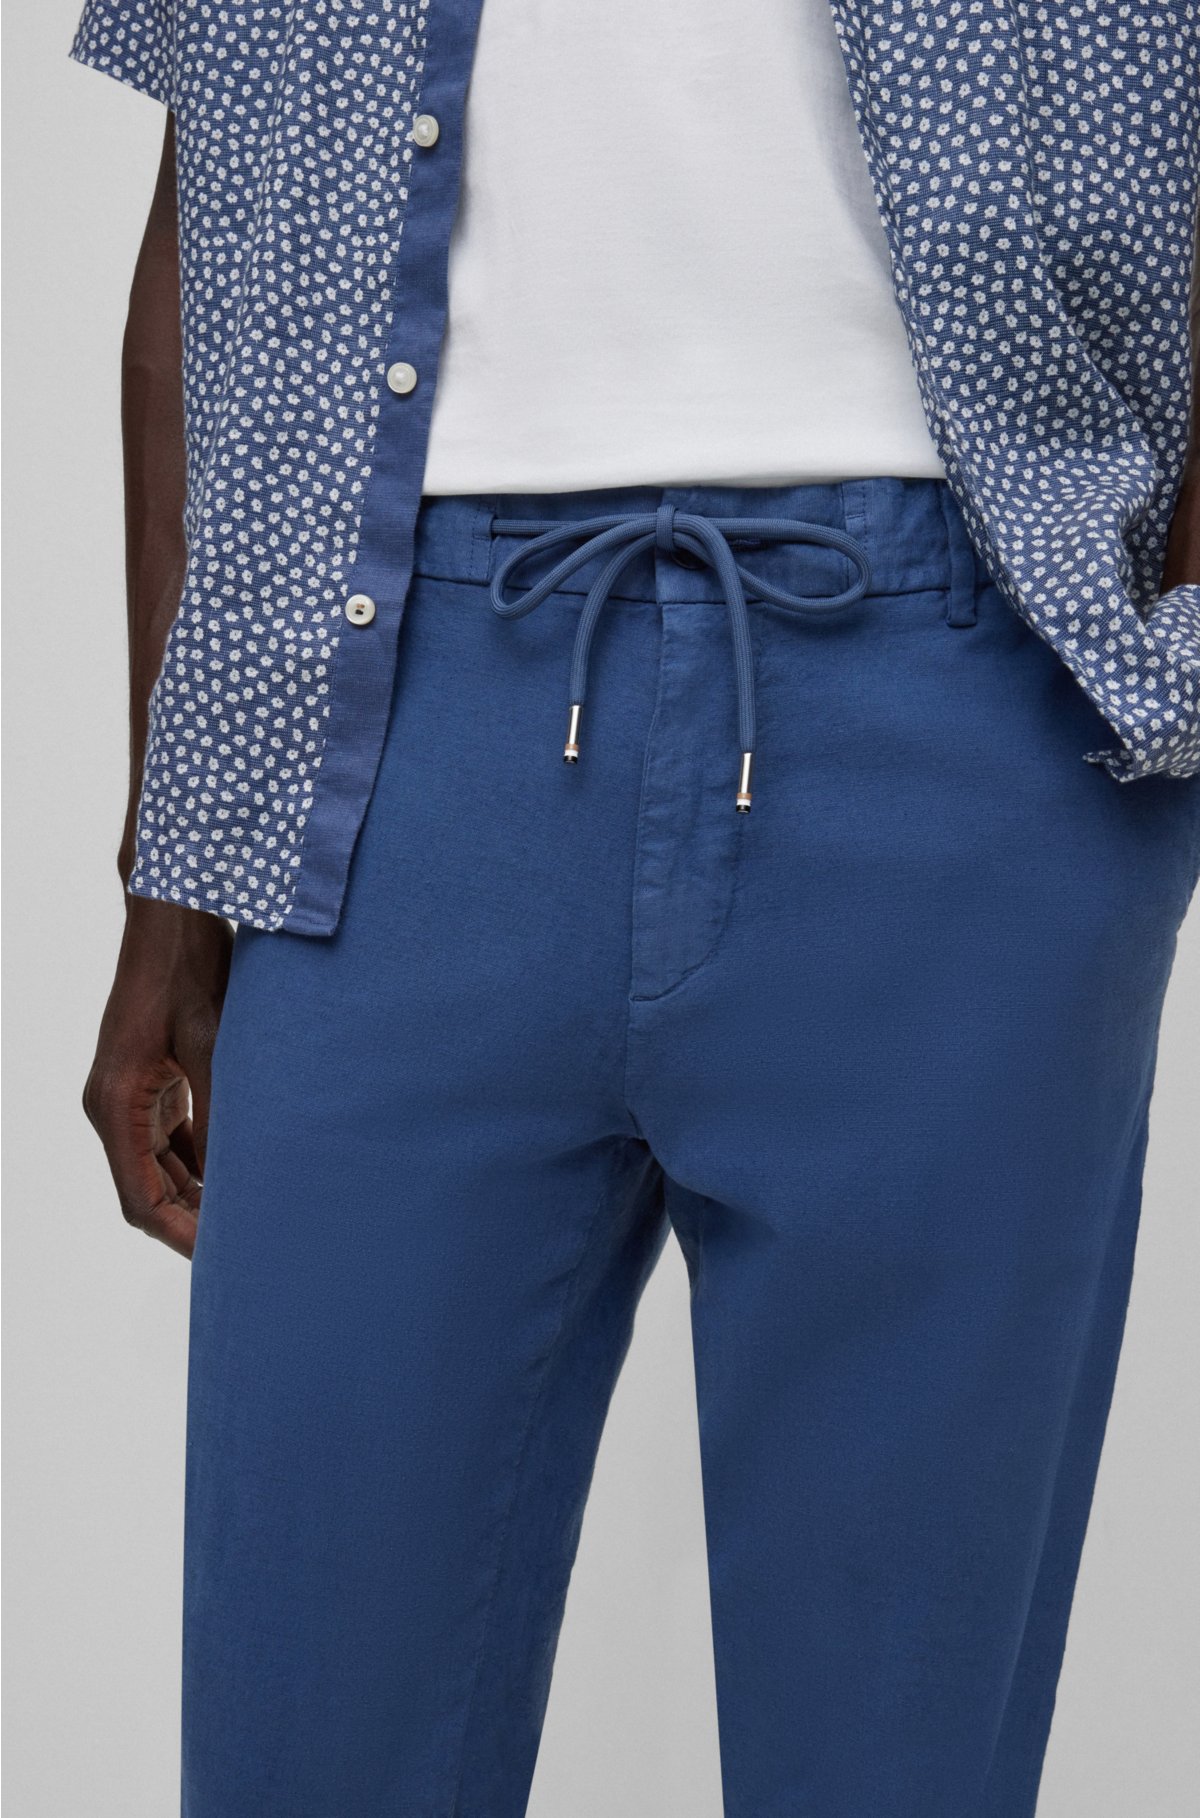 BOSS Pants KANE in jogger style tapered fit with linen in dark blue